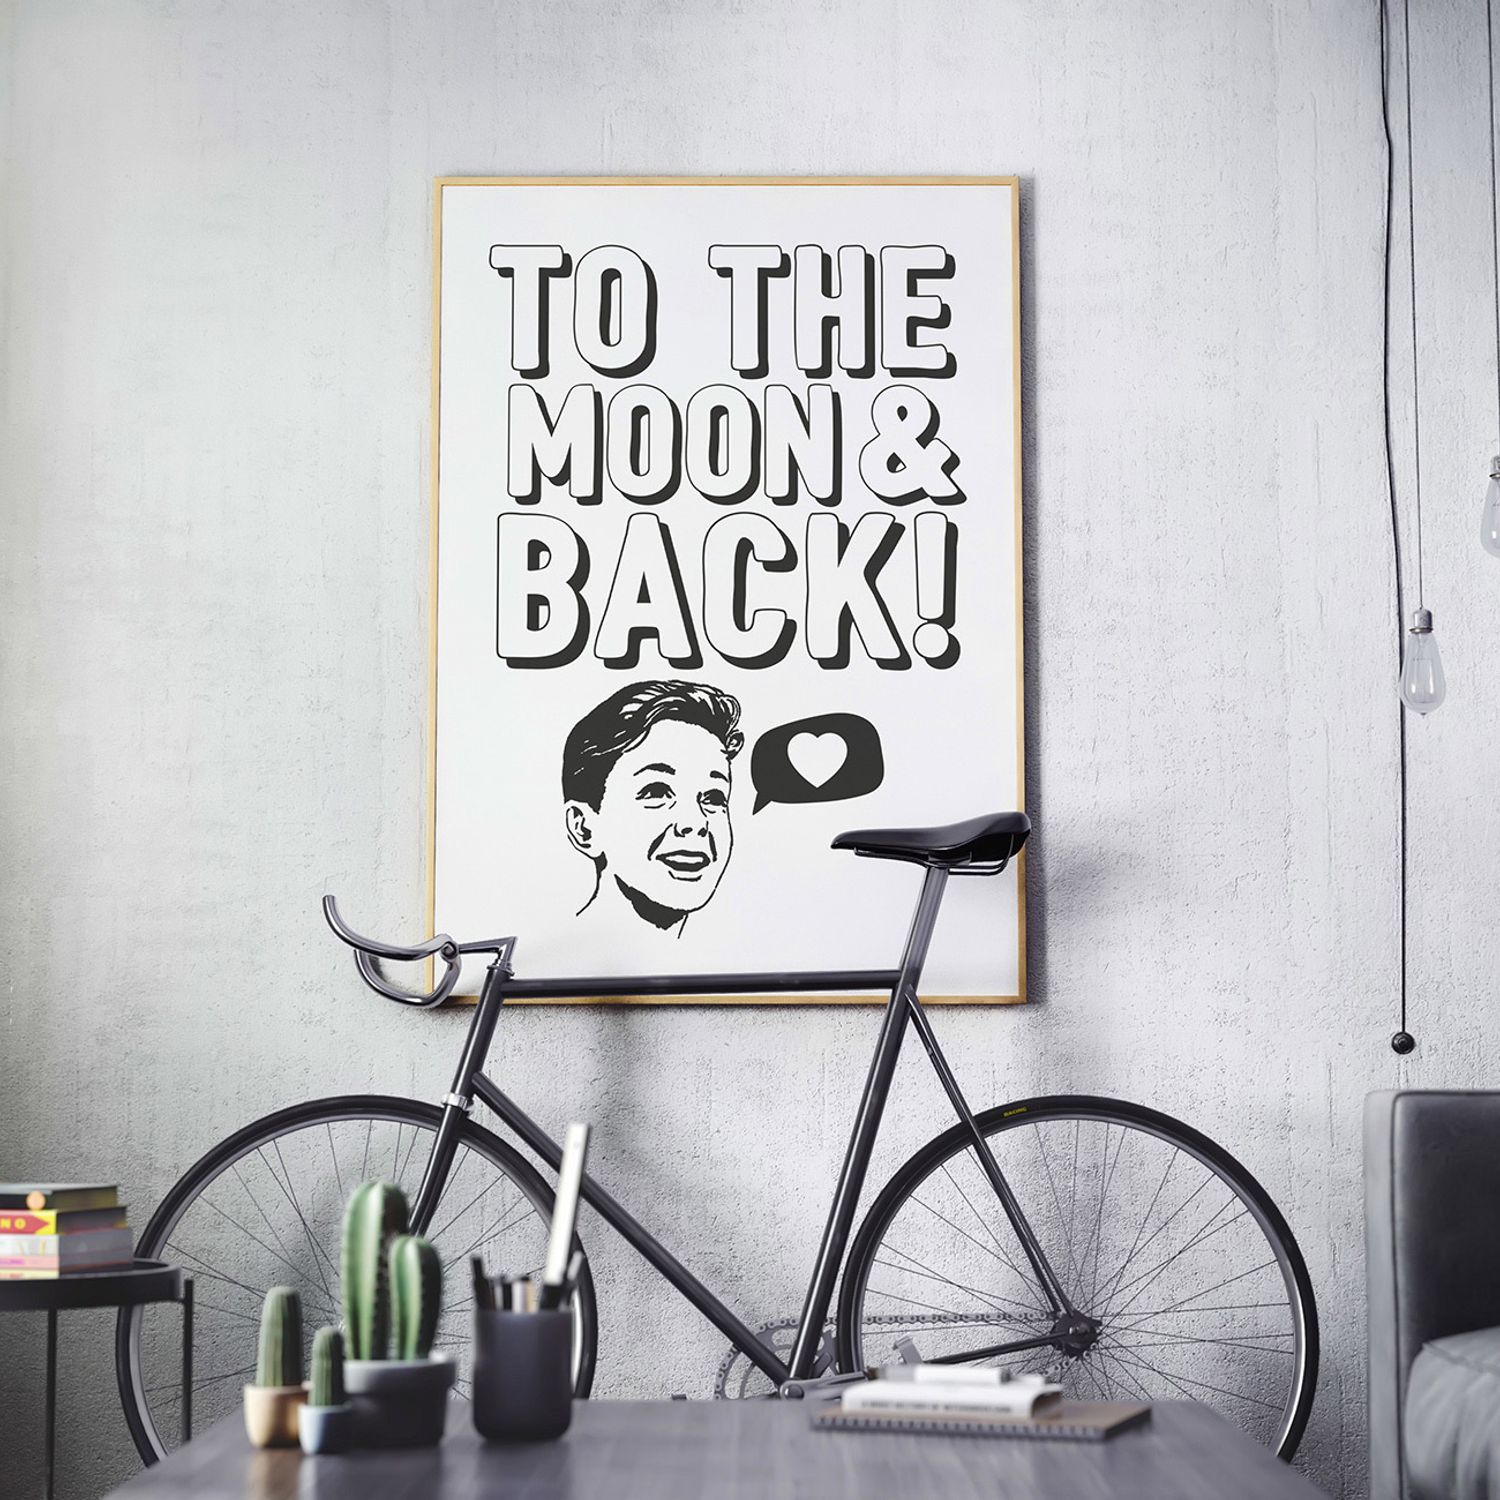 Affisch.To The Moon And Back.Poster